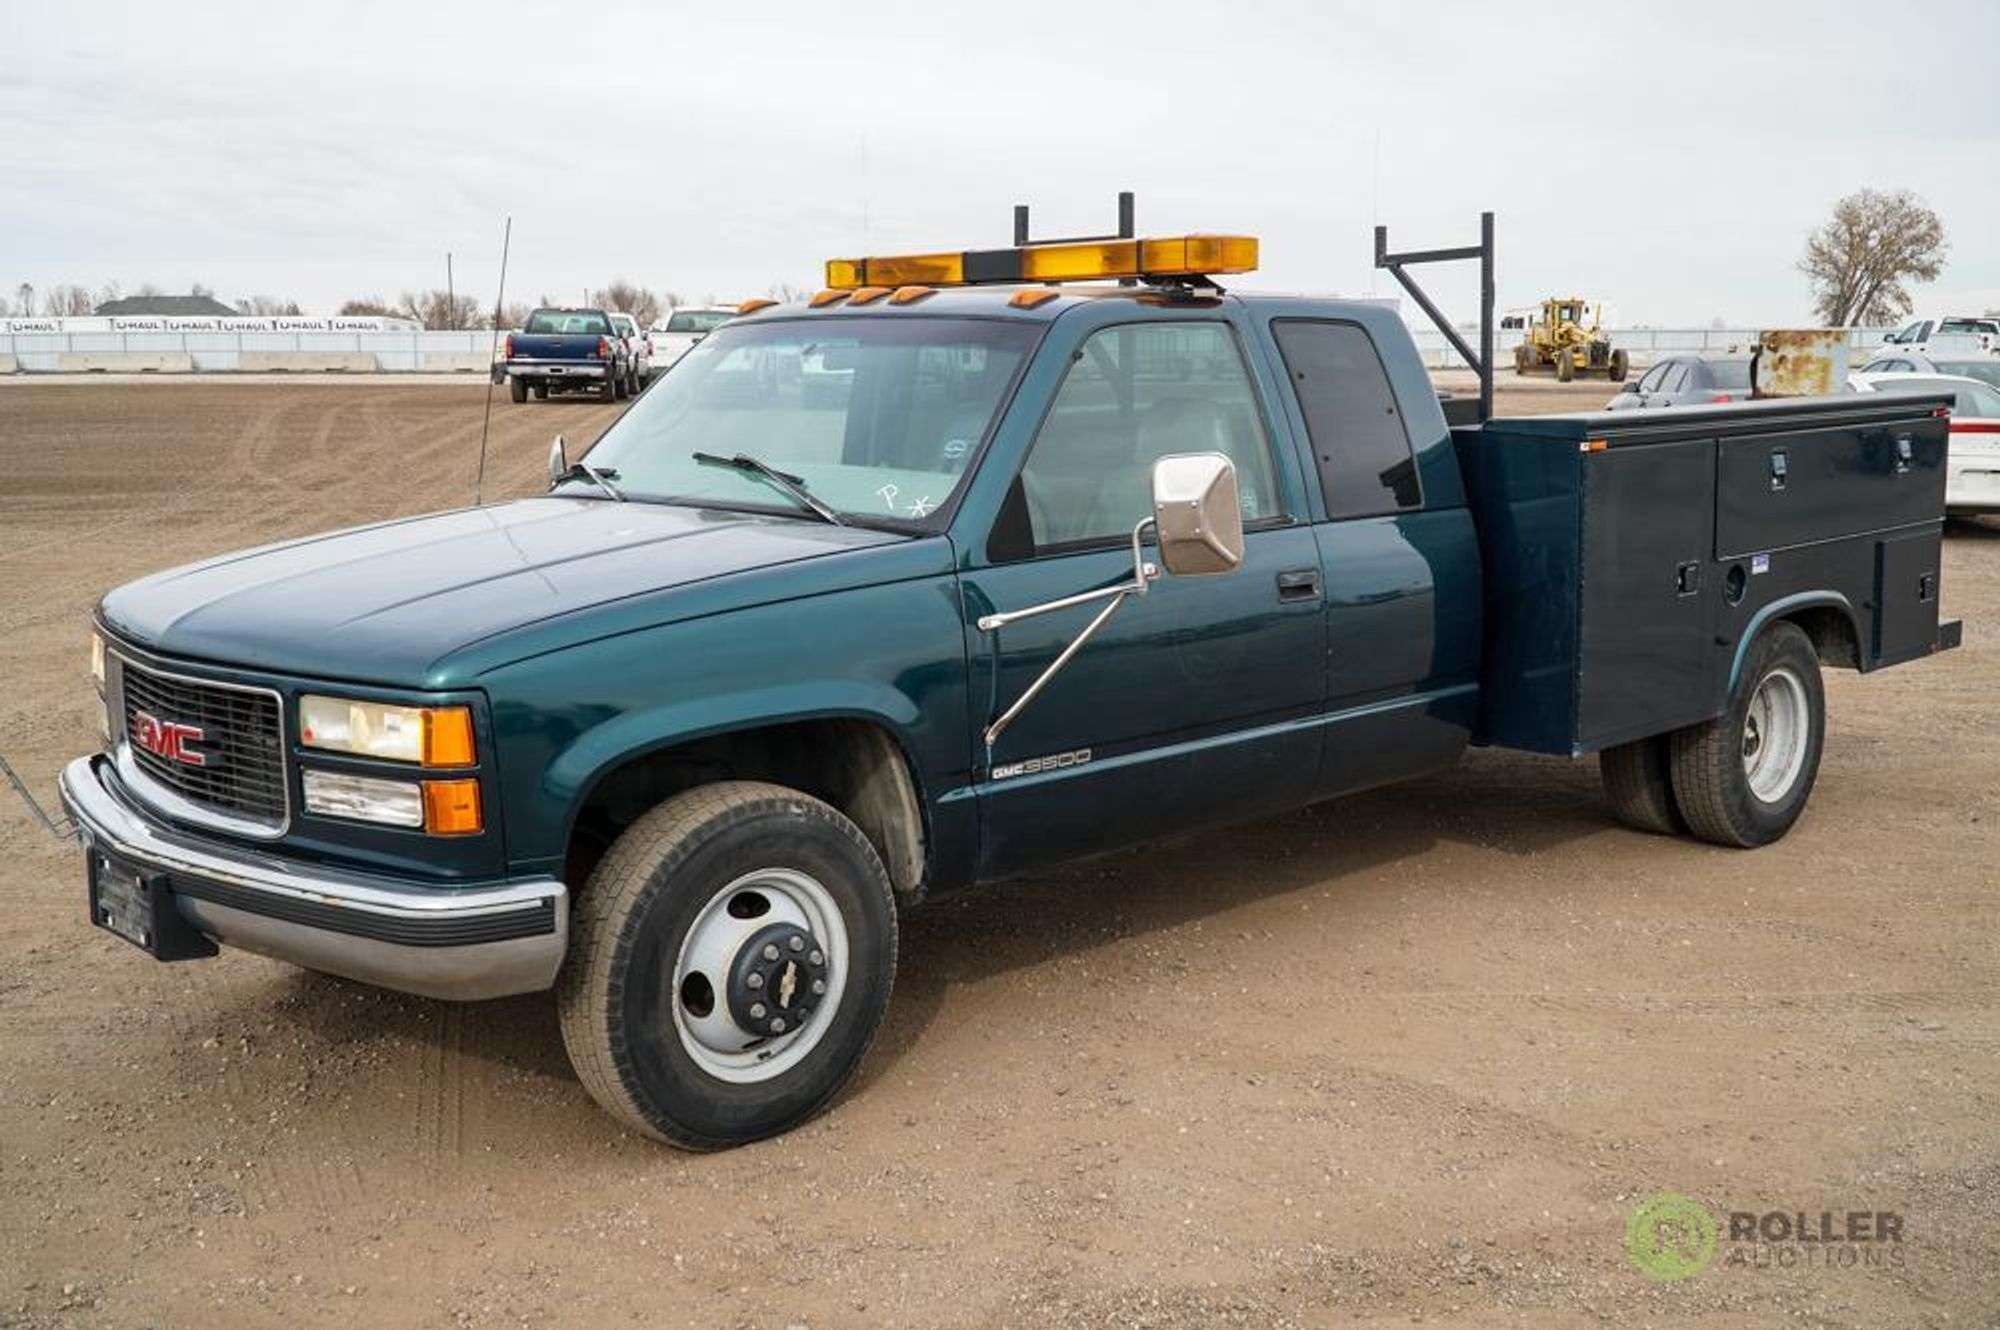 1997 GMC SIERRA 3500 EXTENDED CAB UTILITY TRUCK, Vortec 7.4L V8, Automatic,  Dually, Hail Damage Mileage:84900 Emissions:PASSED VIN:1GTHC39J8VF030245 -  Roller Auctions